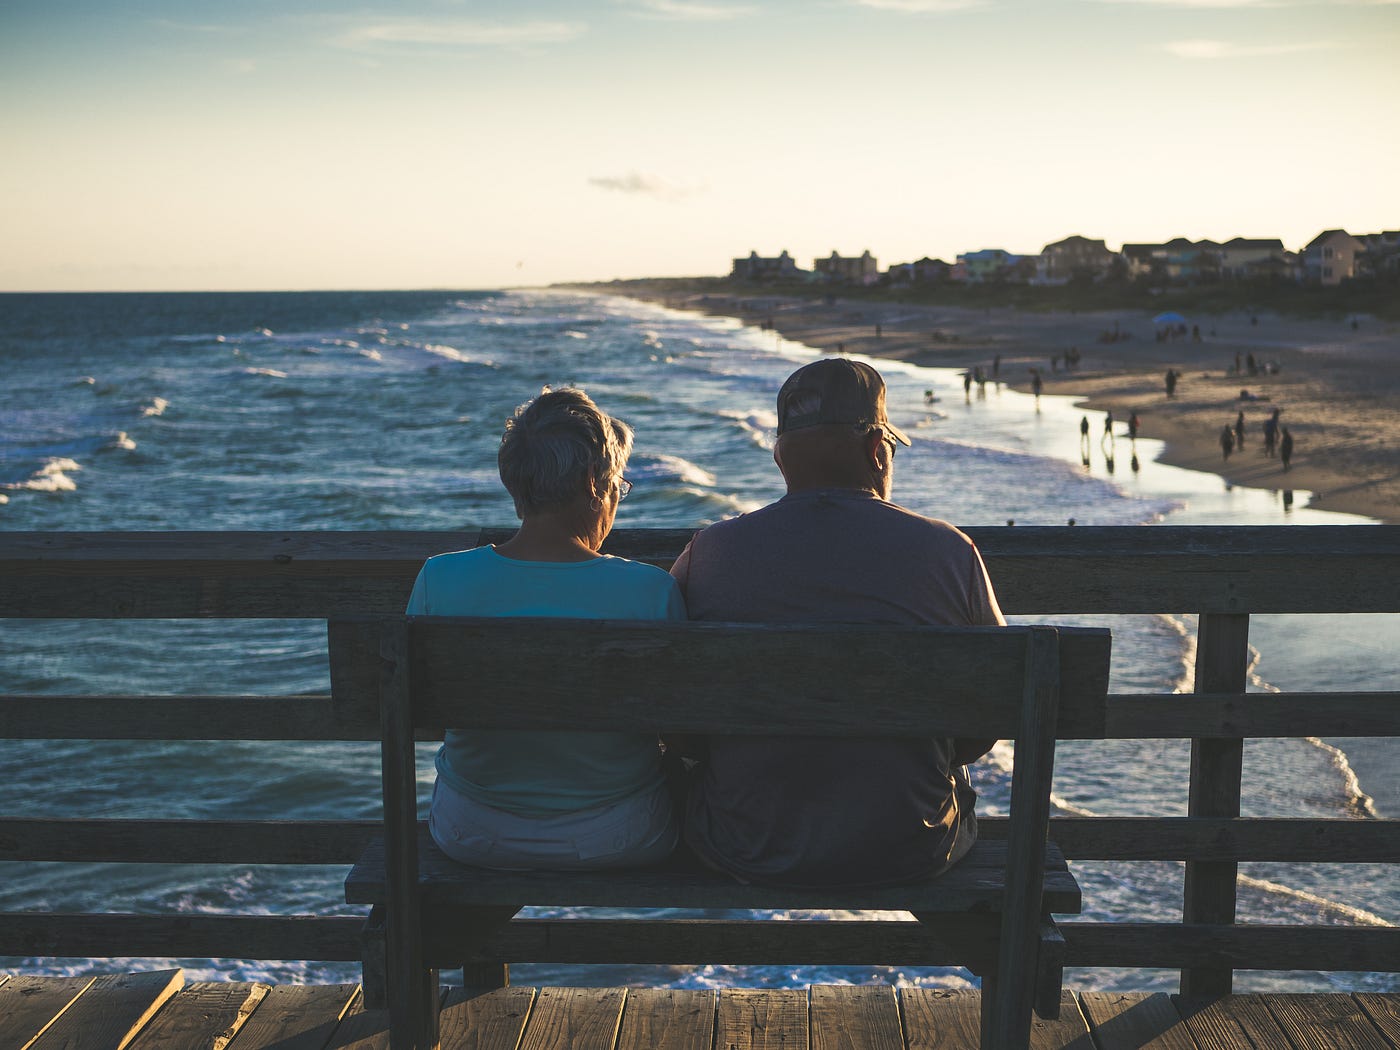 An older couple sits on a bench, facing away from us as they look down at the ocean as it meats the beach.